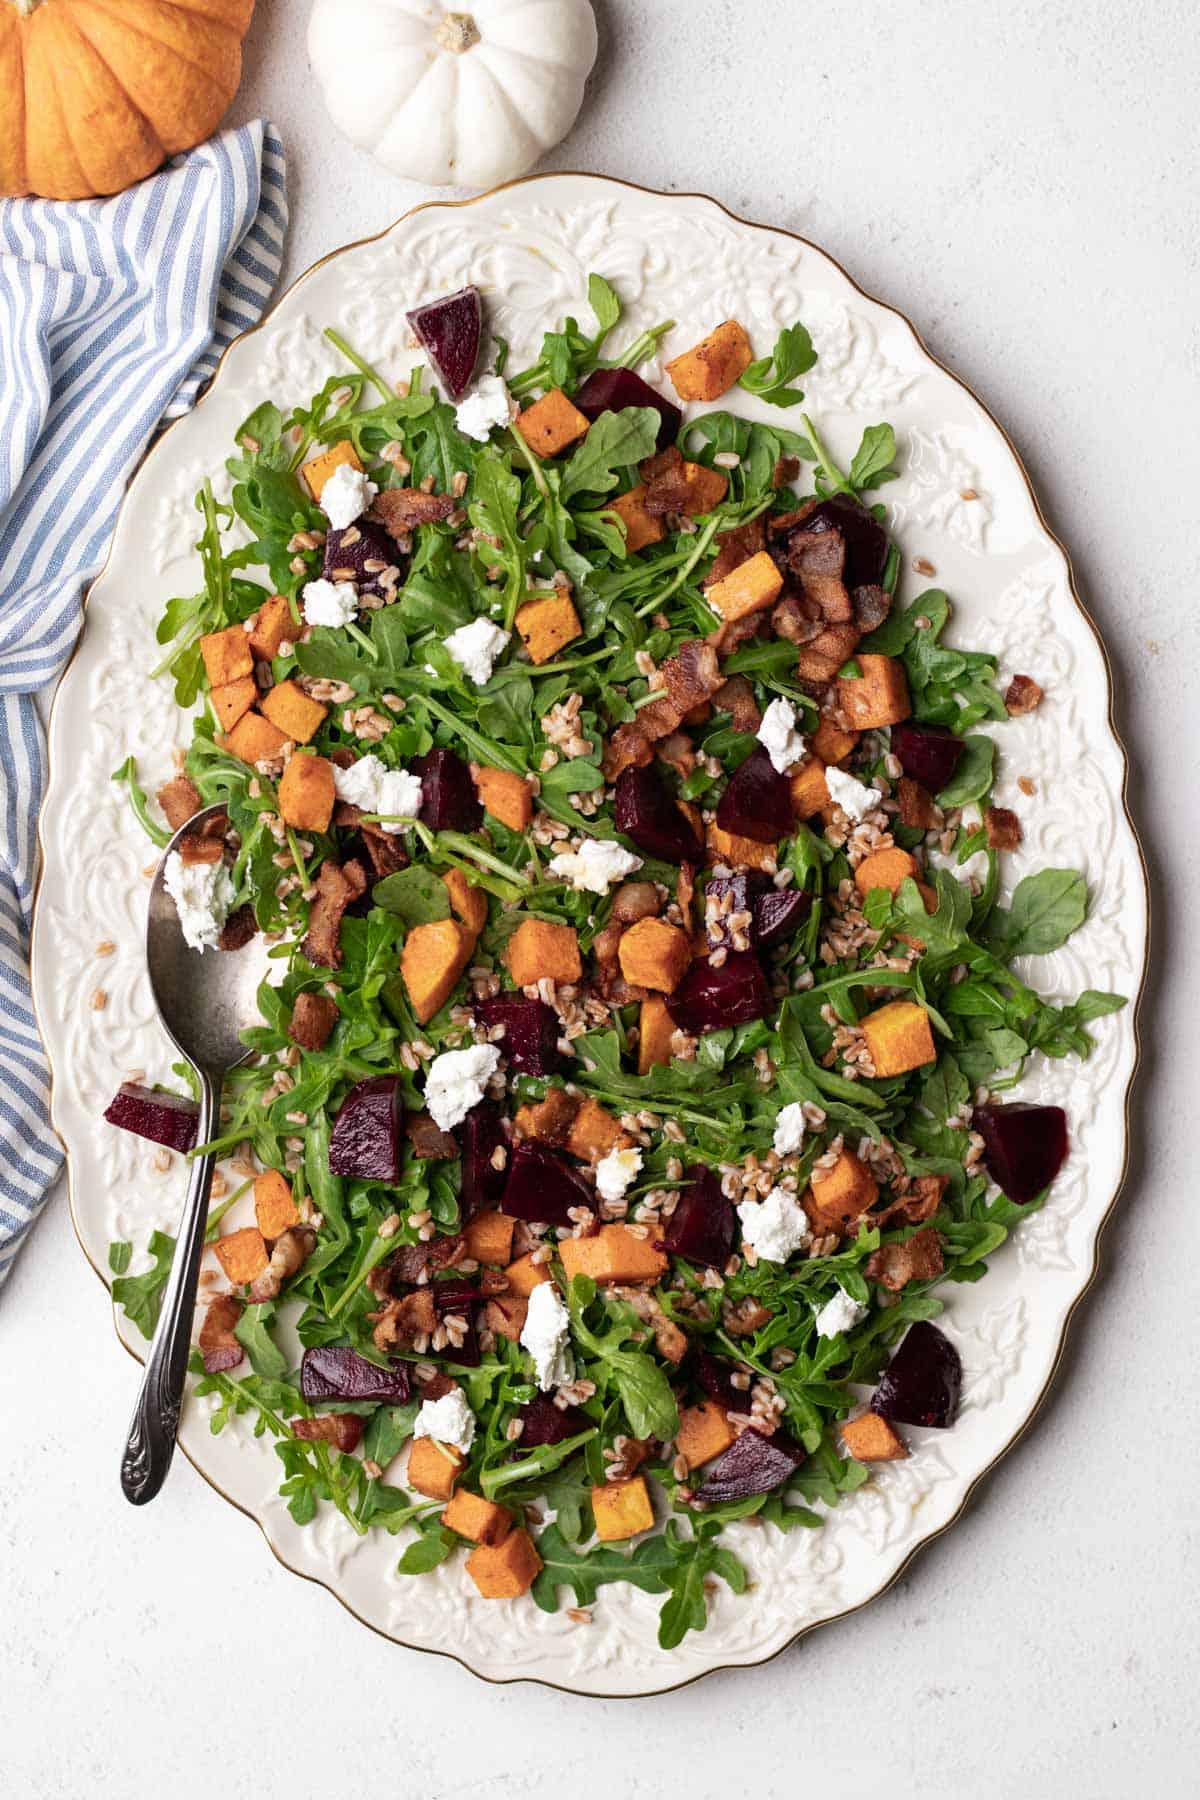 An oval platter with arugula, butternut squash, and beet salad with a serving spoon.